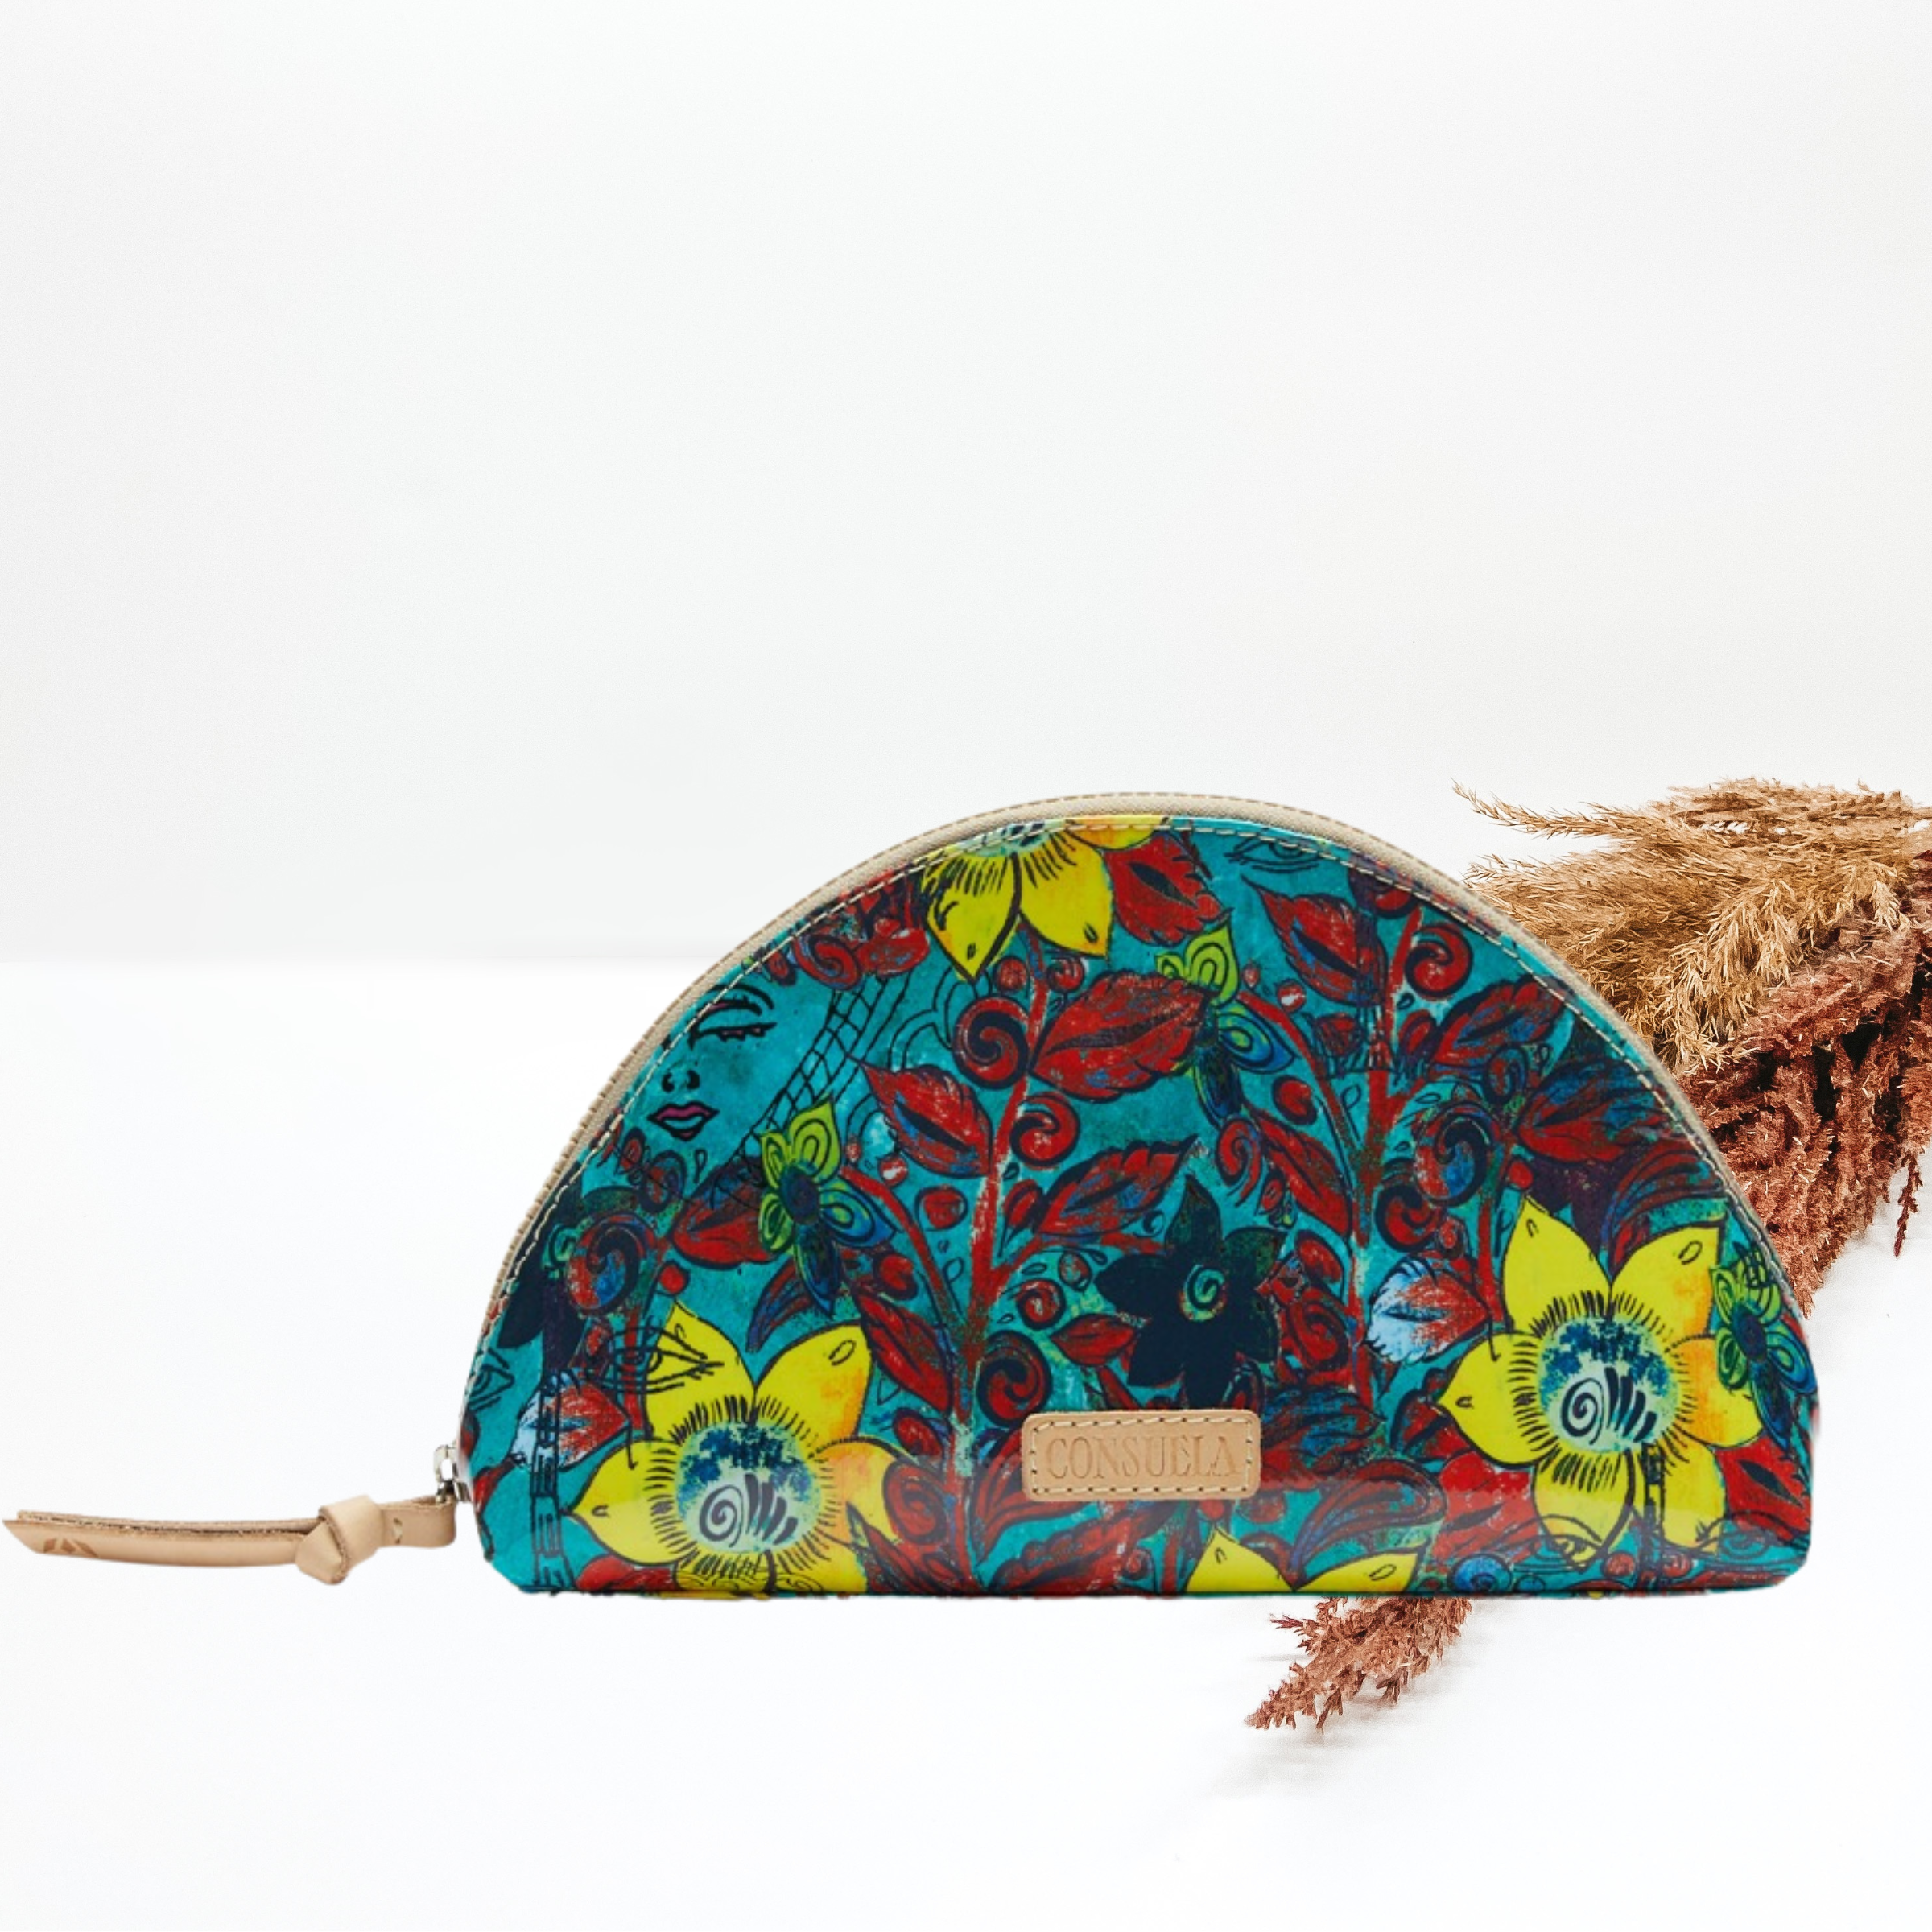 Pictured is a dome shaped cosmetic bag. This is a blue bag with a nacy, yellow, and red print design. It also includes a top zipper. This purse is pictured on a white background with pompous grass on the right side of the picture.